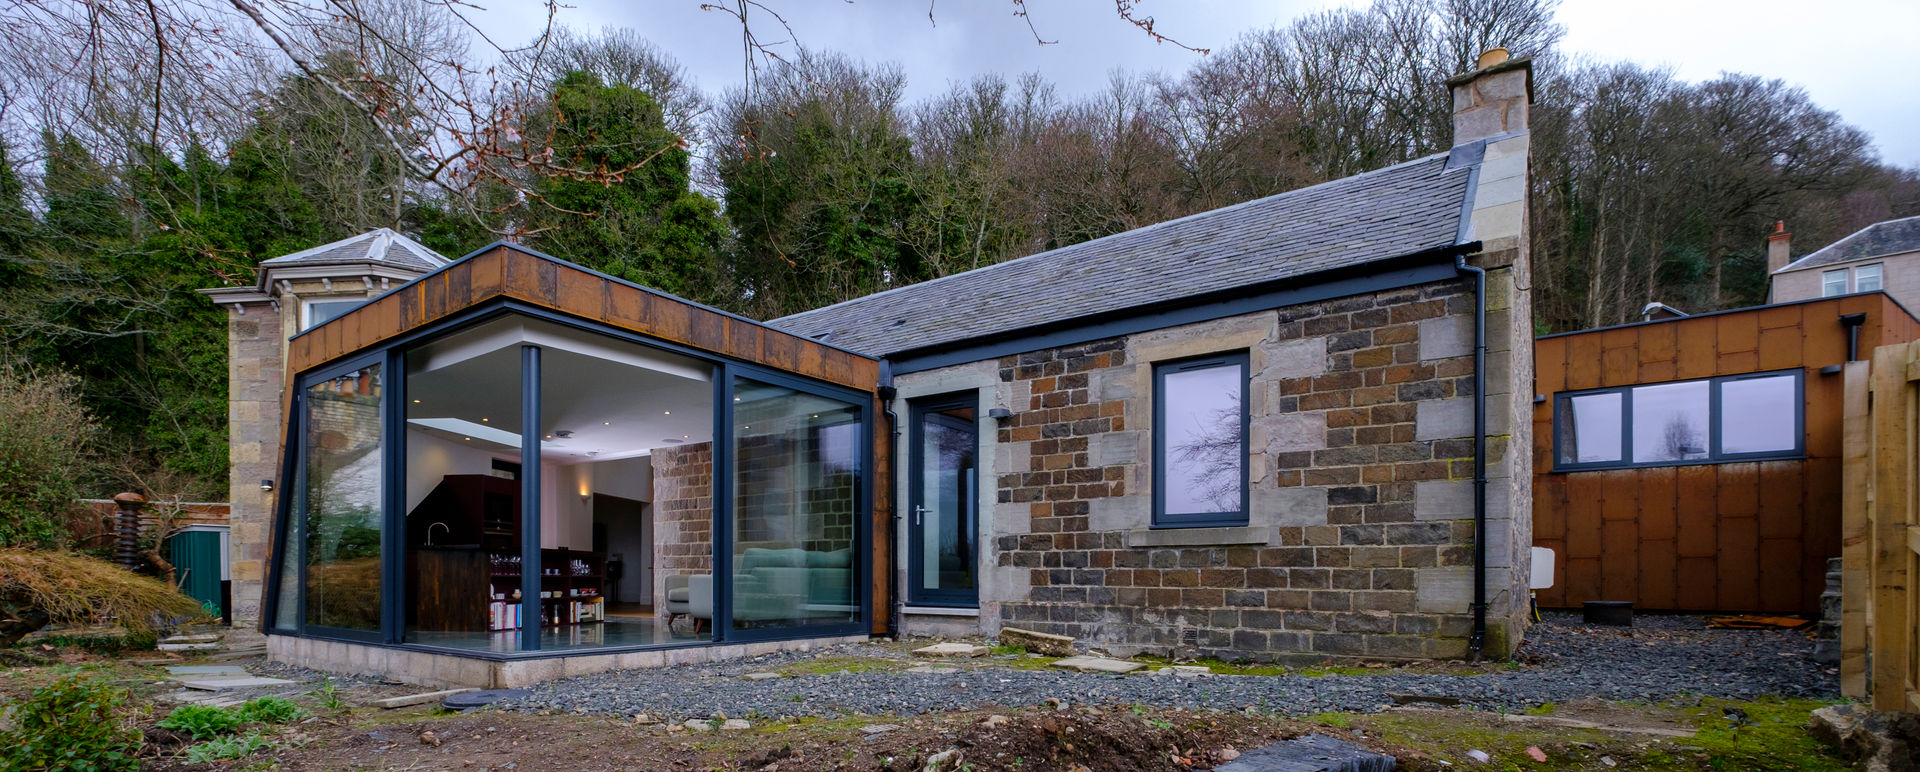 The rear extension to Woodend Cottage is clad in Corten steel and features large glass sliding doors Woodside Parker Kirk Architects Maisons modernes Fer / Acier Corten steel,cladding,cottage,extension,flat roof,alu-clad windows,daylight,garden